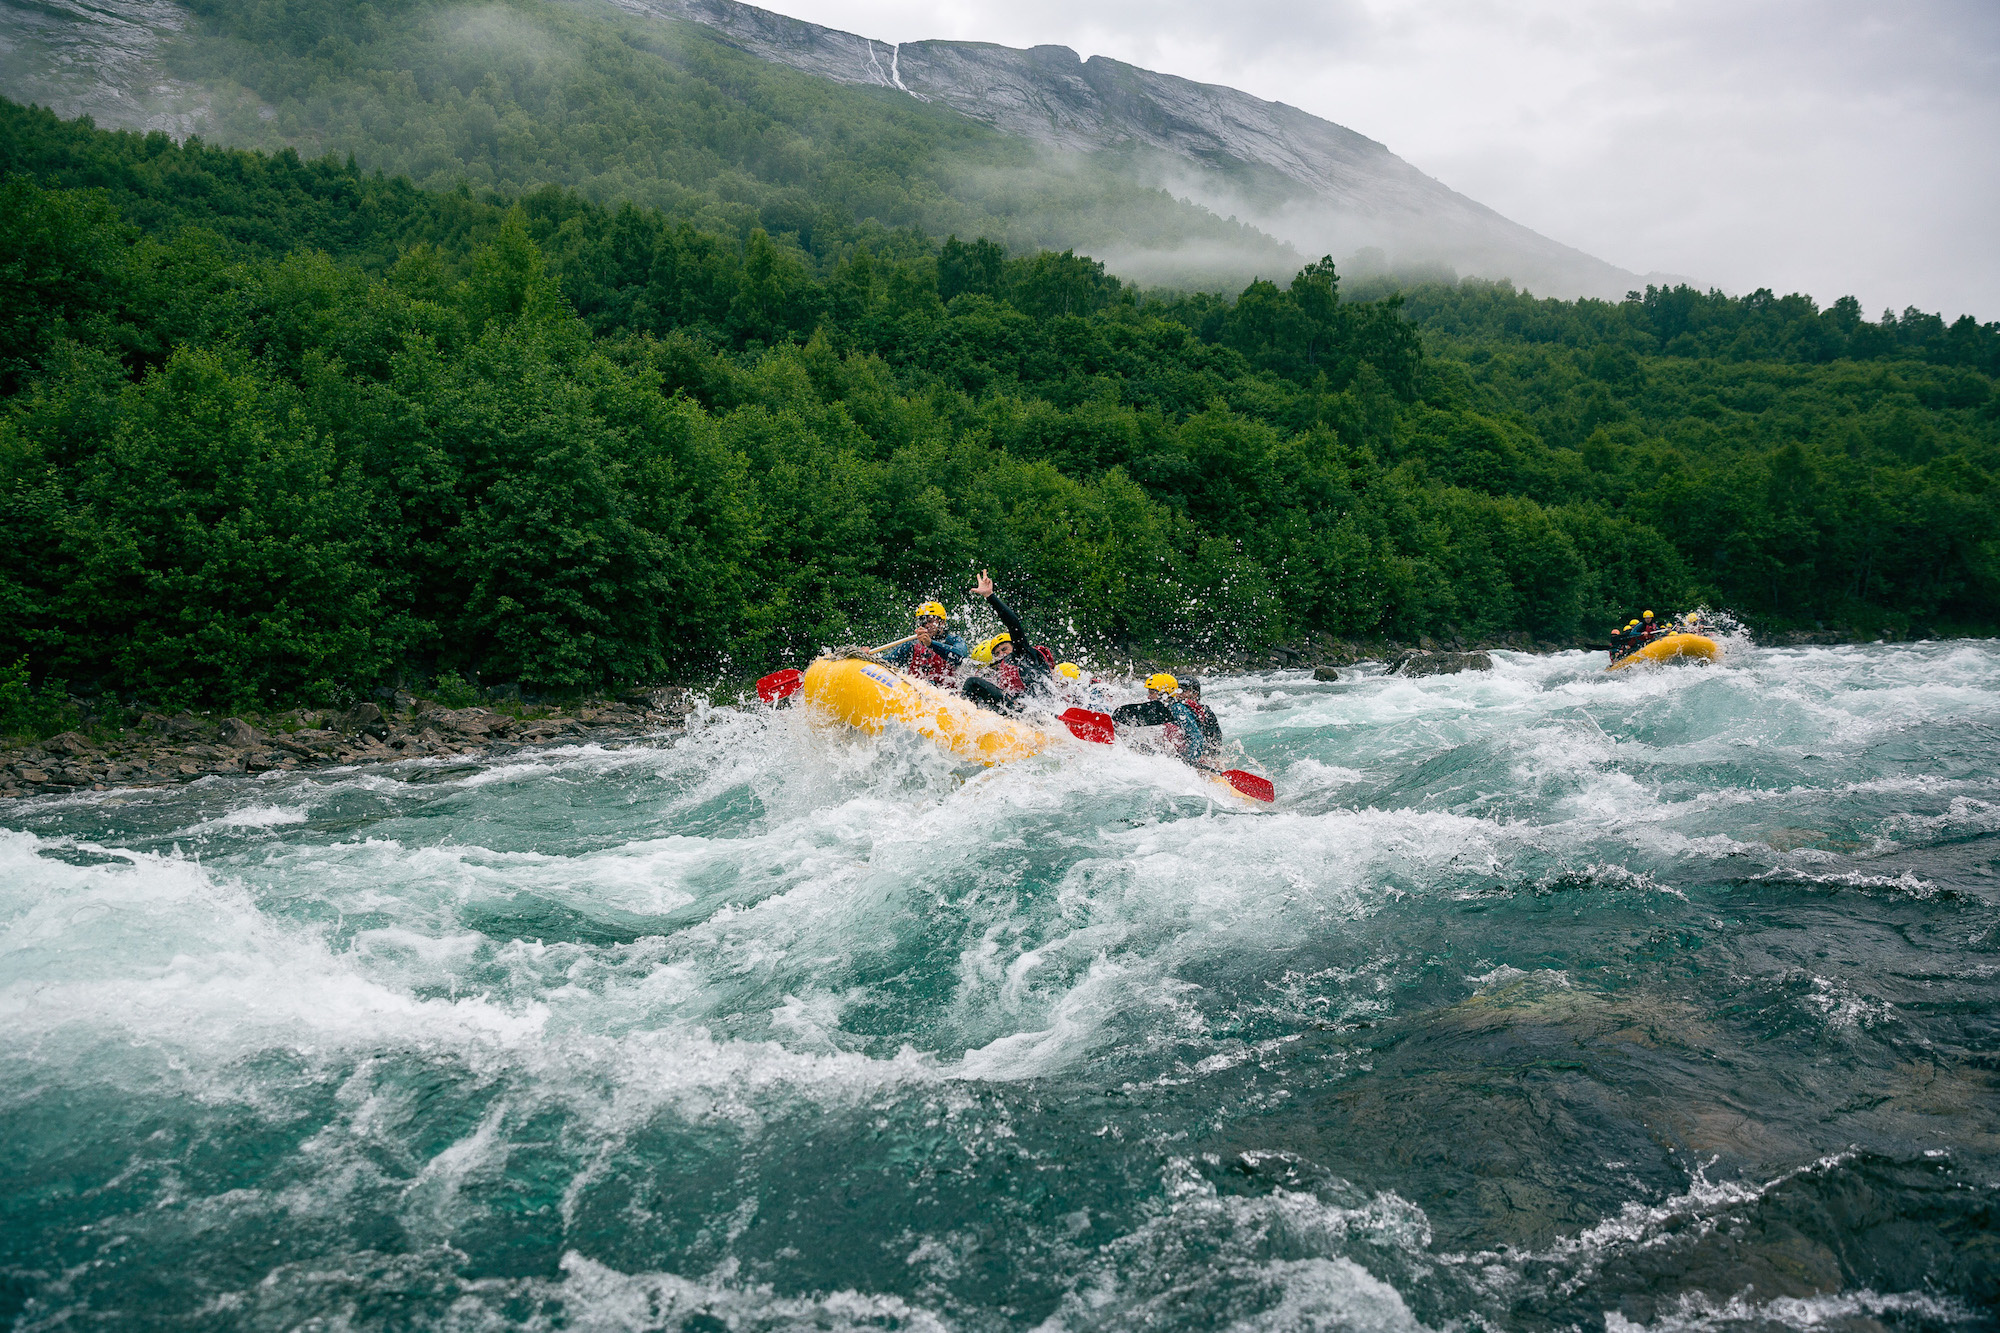 Rafting: Whitewater boating in Norway's Valldal, Extreme adventure sports discipline. 2000x1340 HD Wallpaper.